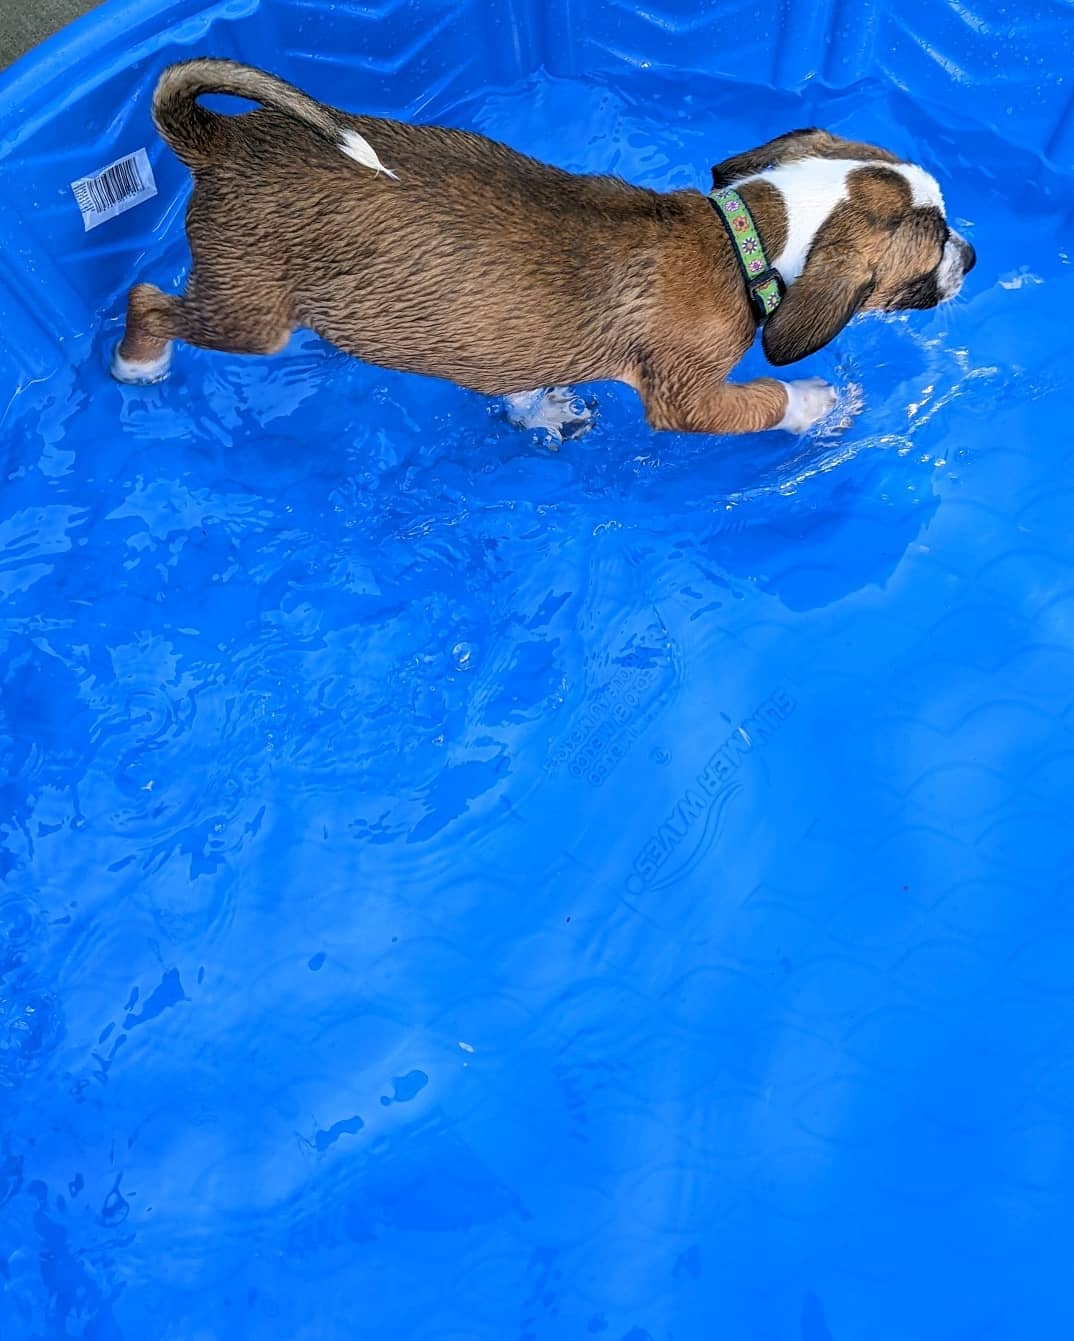 The NC Beaches litter is just having a blast !! Puppy pool party today ❤️. ⠀
Carolina, Carova, Emerald, Rodanthe (females), Kure, Holden and Manteo (males) are almost due for their 2nd shots and go to their foster to adopt families! No applications so far 🤔 whaaat?! These will likely be medium sized dogs, cur beagle suspected mix ☺️ then there's sweet Sulli having some puppy fun ! Still no applications for him either!! We have no idea what's going on. ⠀
Adoption donations are higher because they will have a paid for training class to help adopters survive puppyhood 👌🏼😇❤️